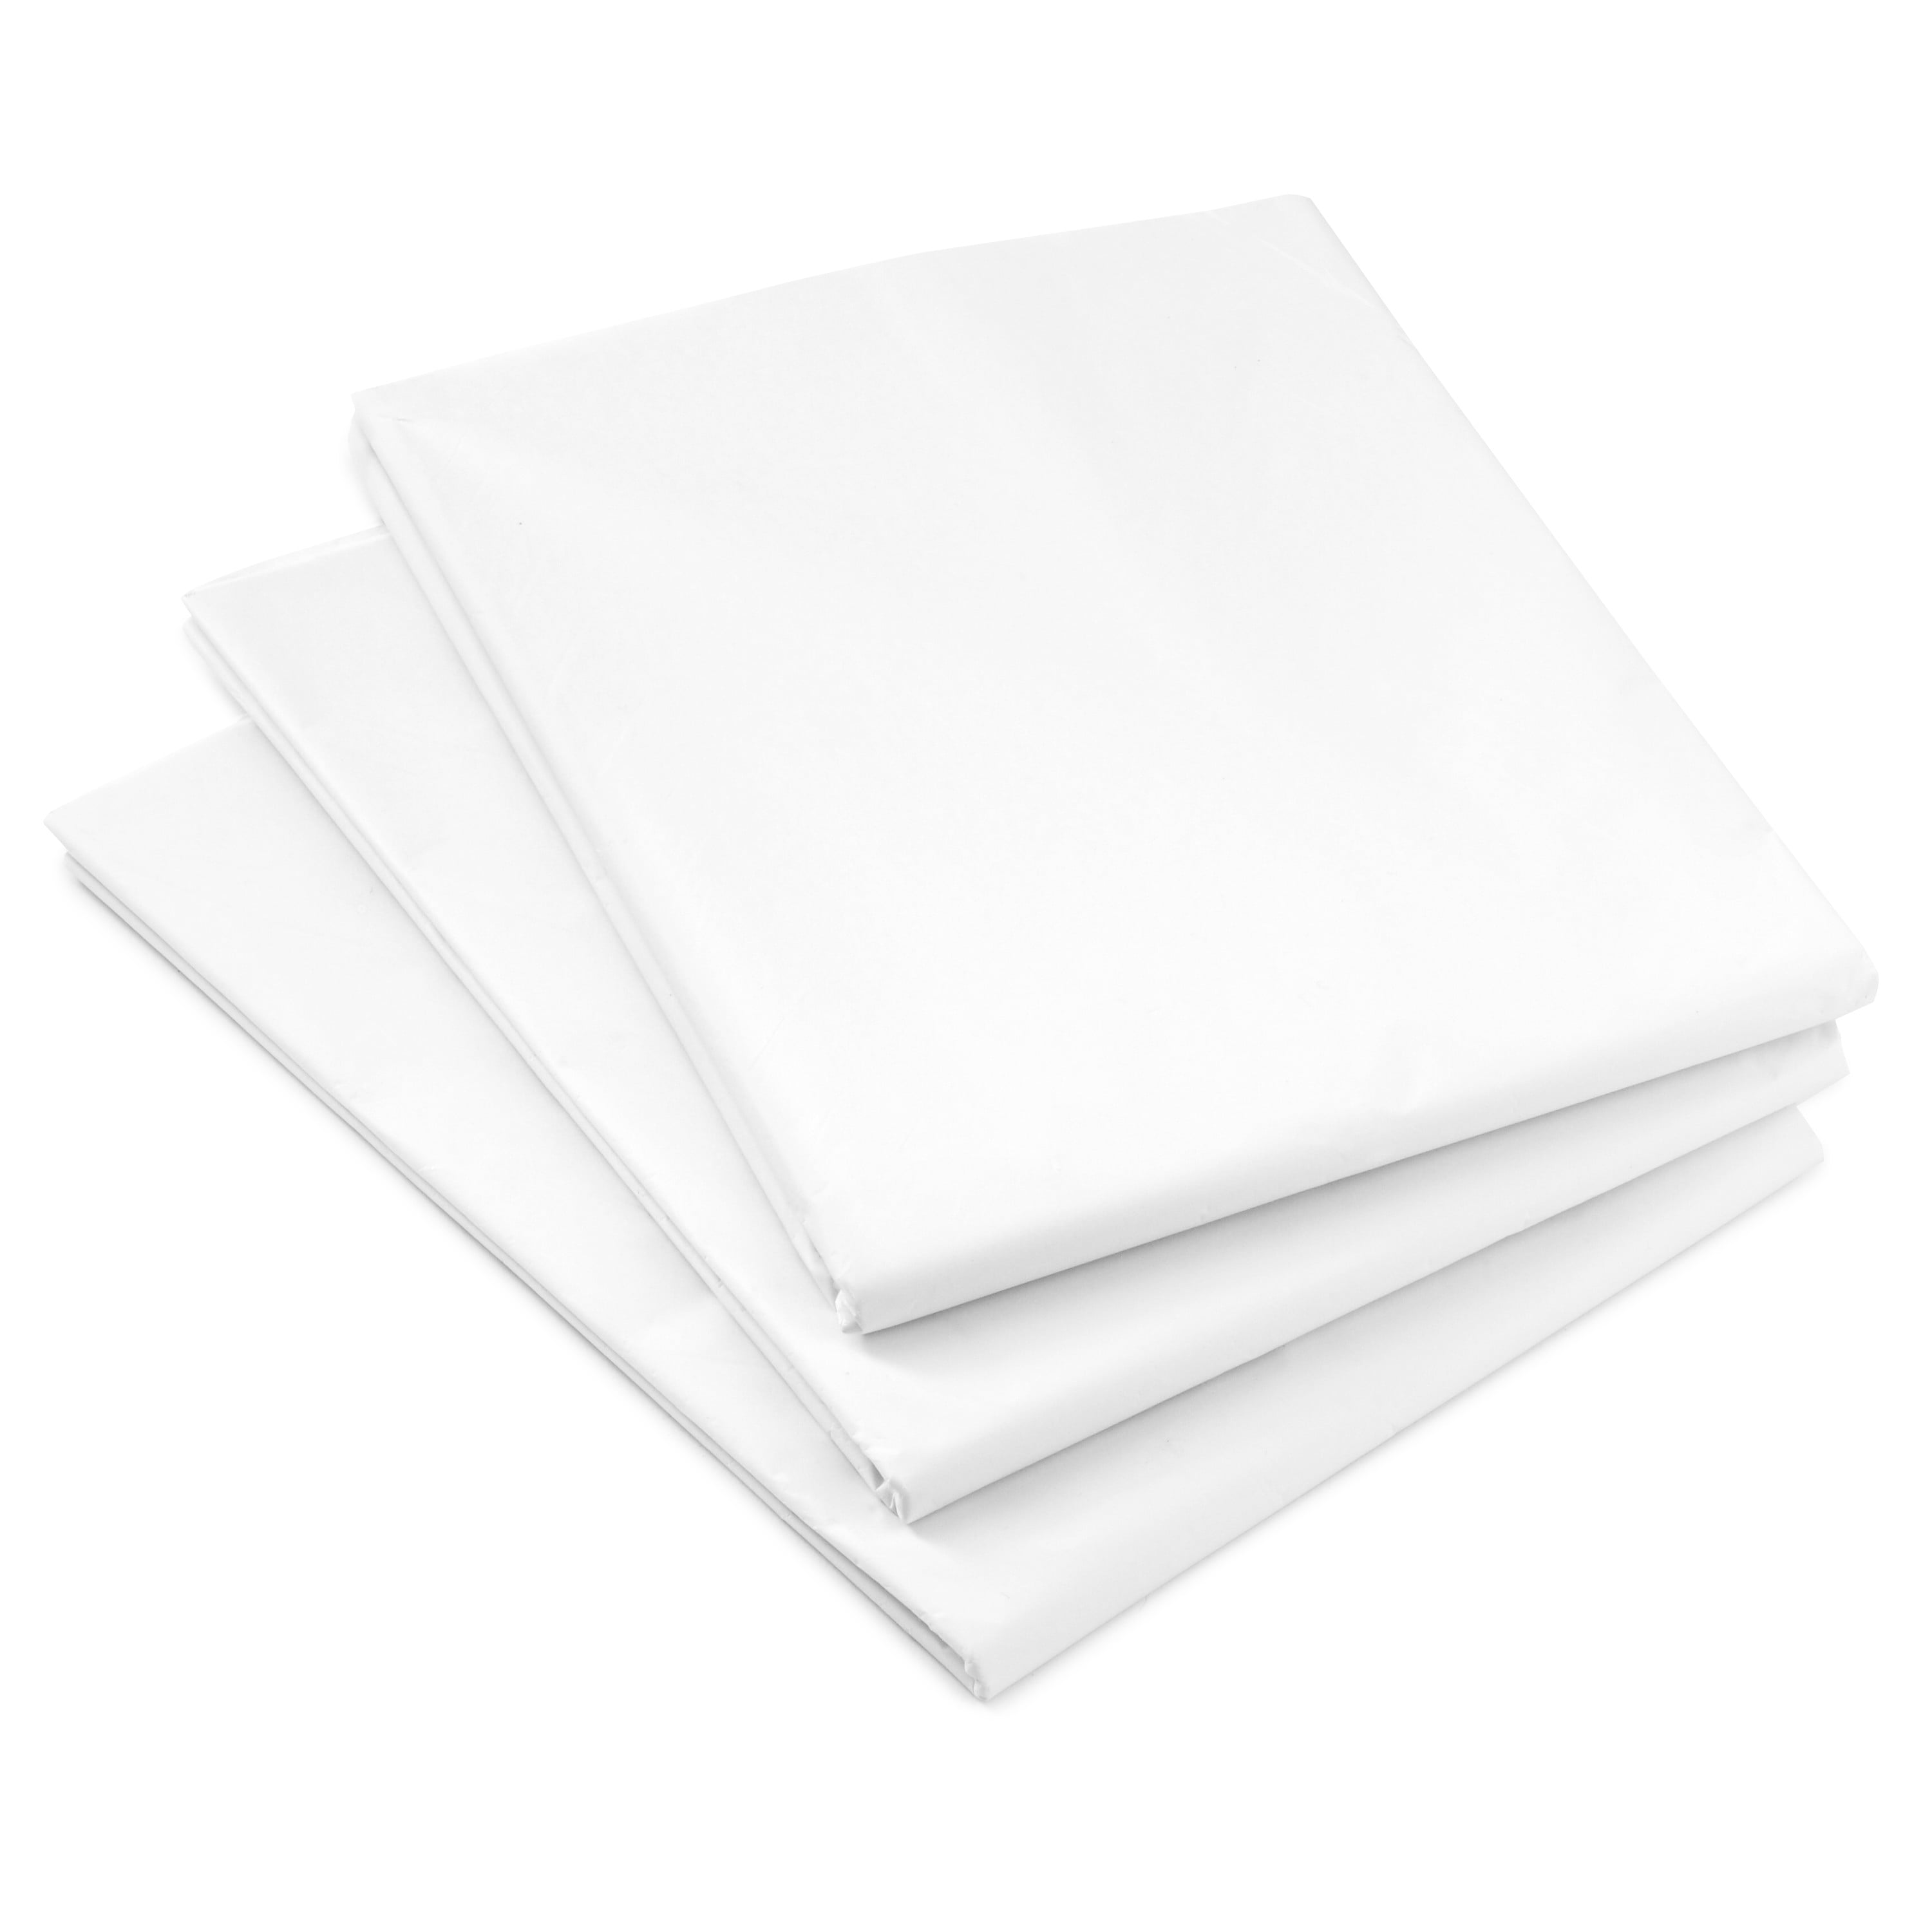 BRAND NEW AND STRONG SHEETS OF WHITE ACID FREE TISSUE PAPER 450x700mm *QUALITY* 